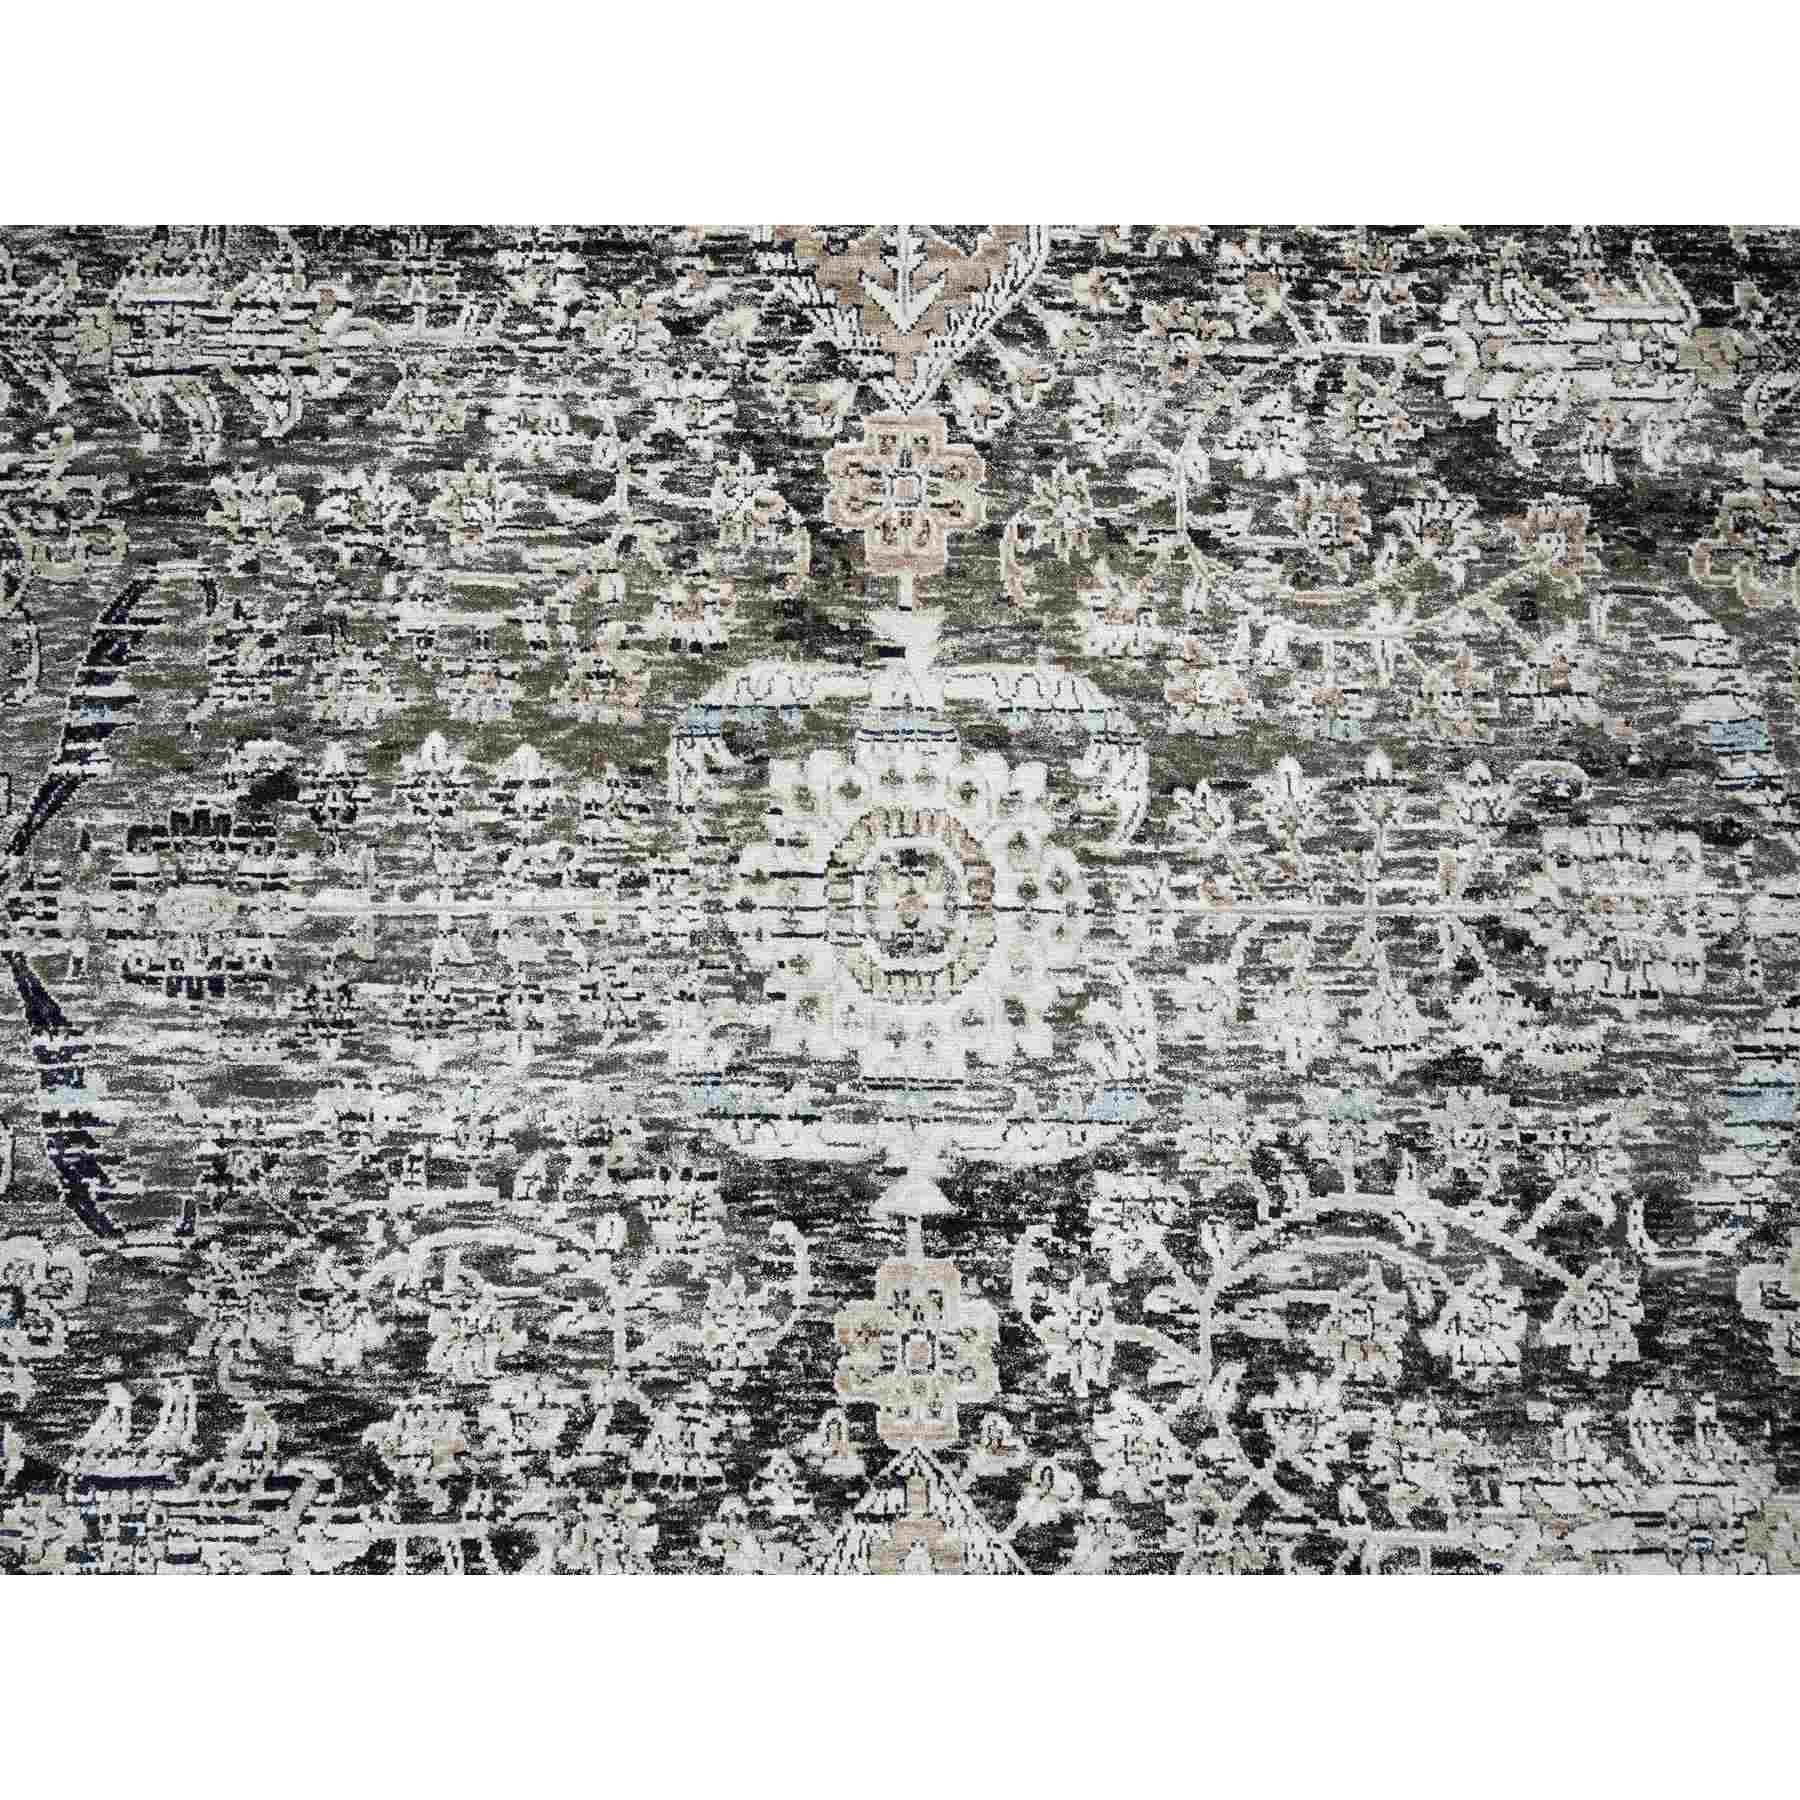 Transitional-Hand-Knotted-Rug-328445